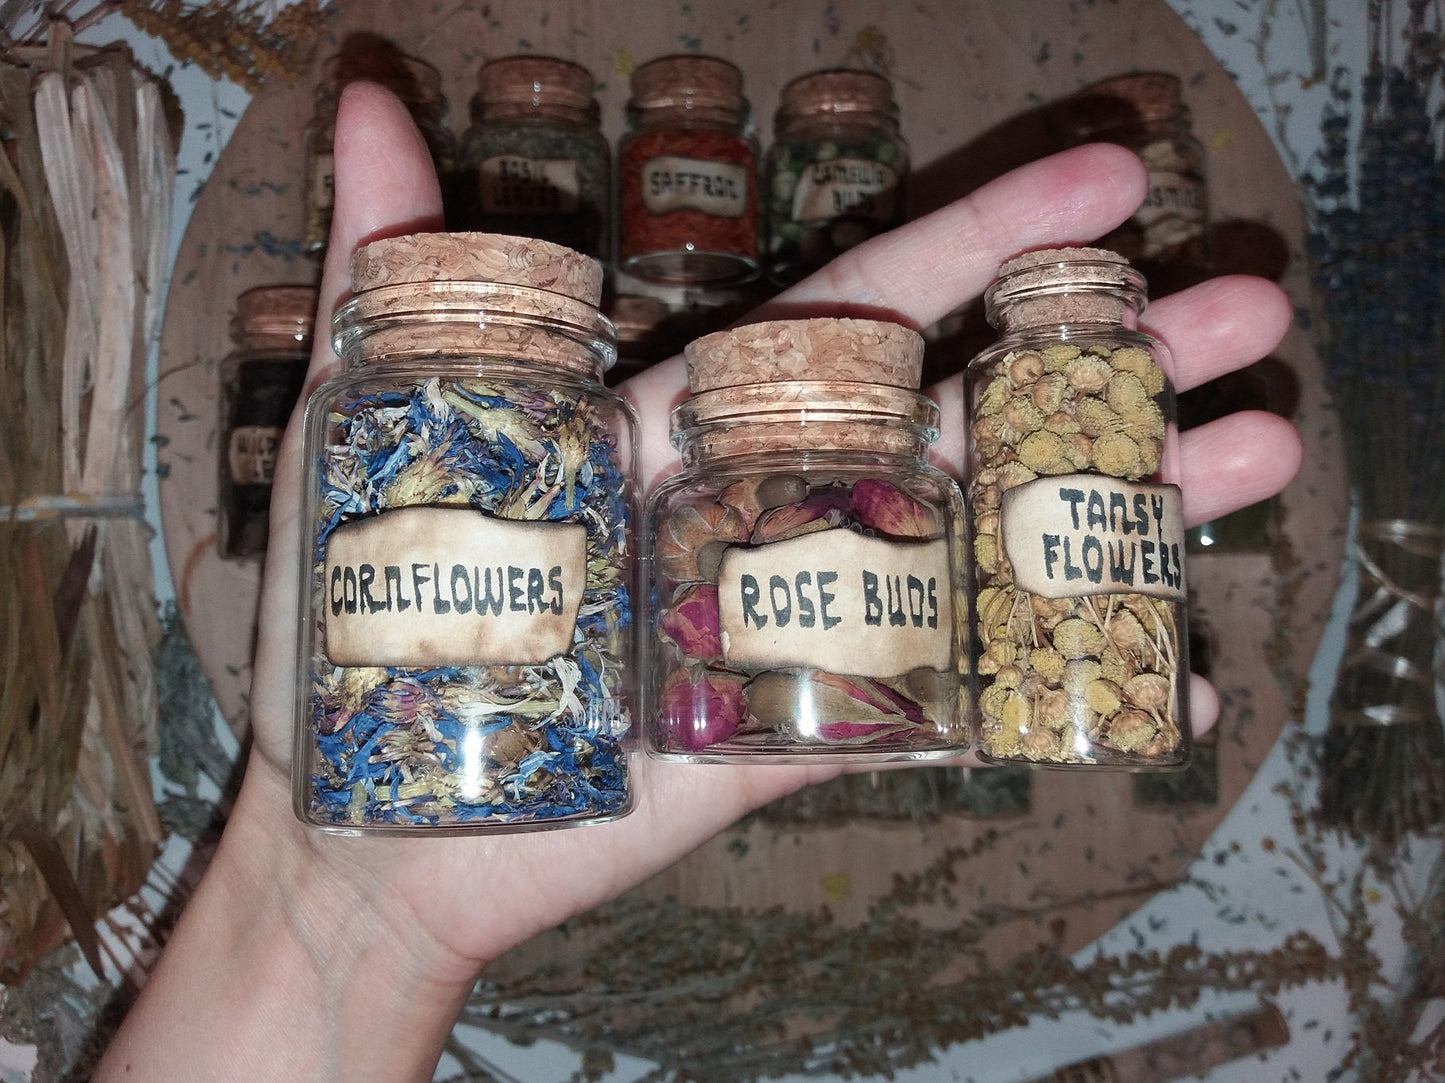 Herbal Bottles 1 oz  1.76 oz  2.77 oz Apothecary, Dried Herbs and Flowers, Witchcraft Magic Supplies, Bath Tea Soap Candles Craft - DukeCityHerbs